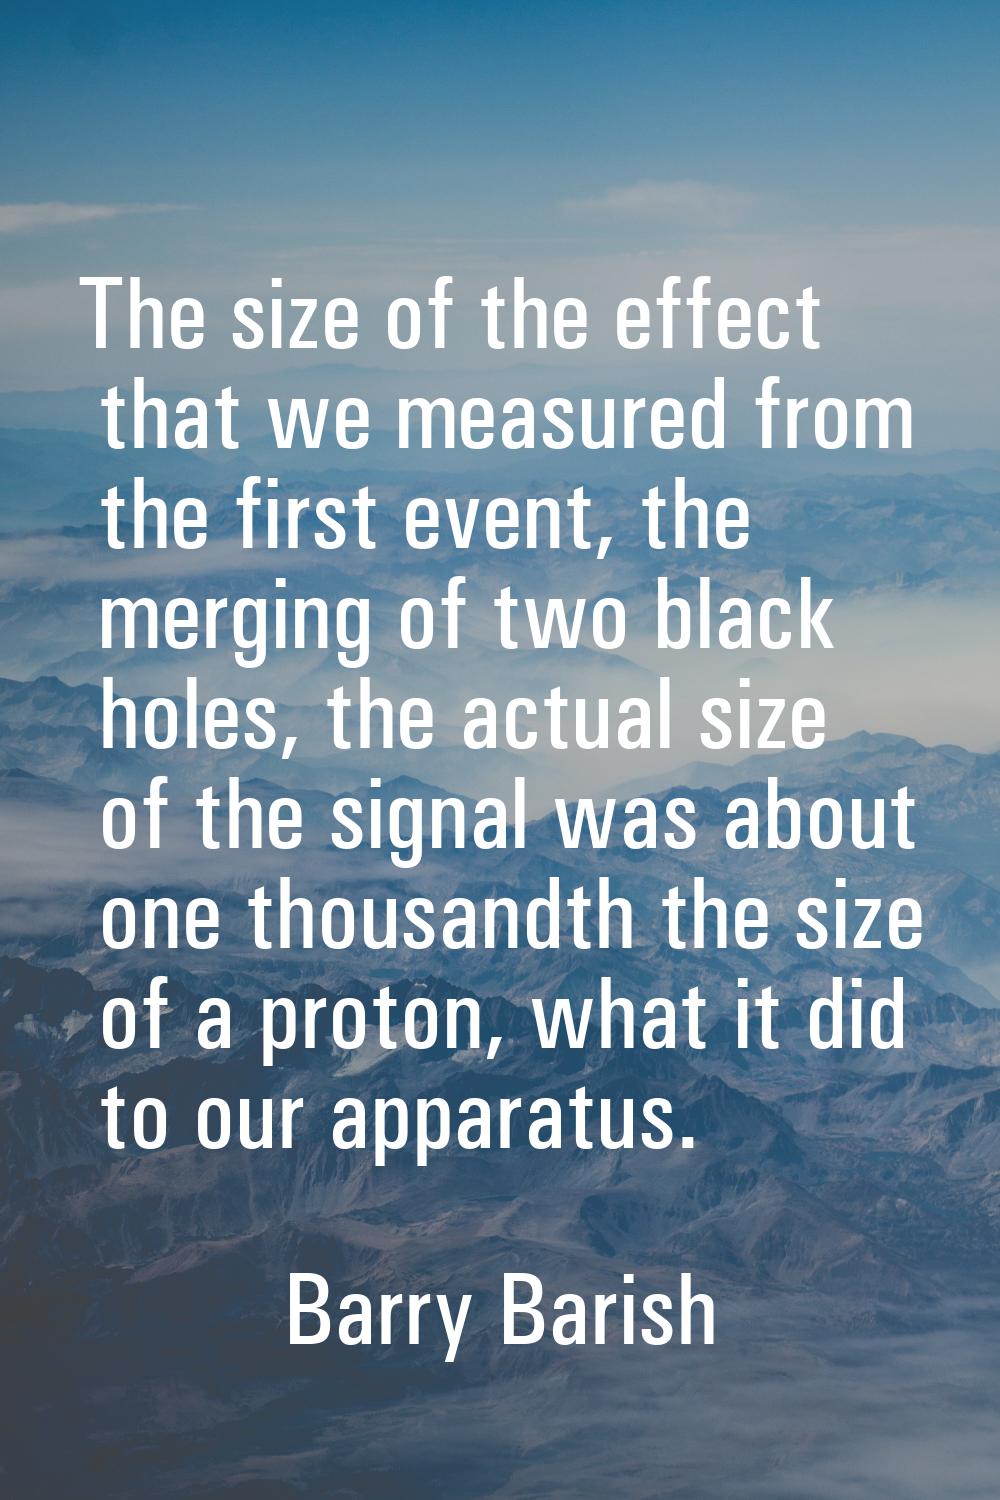 The size of the effect that we measured from the first event, the merging of two black holes, the a